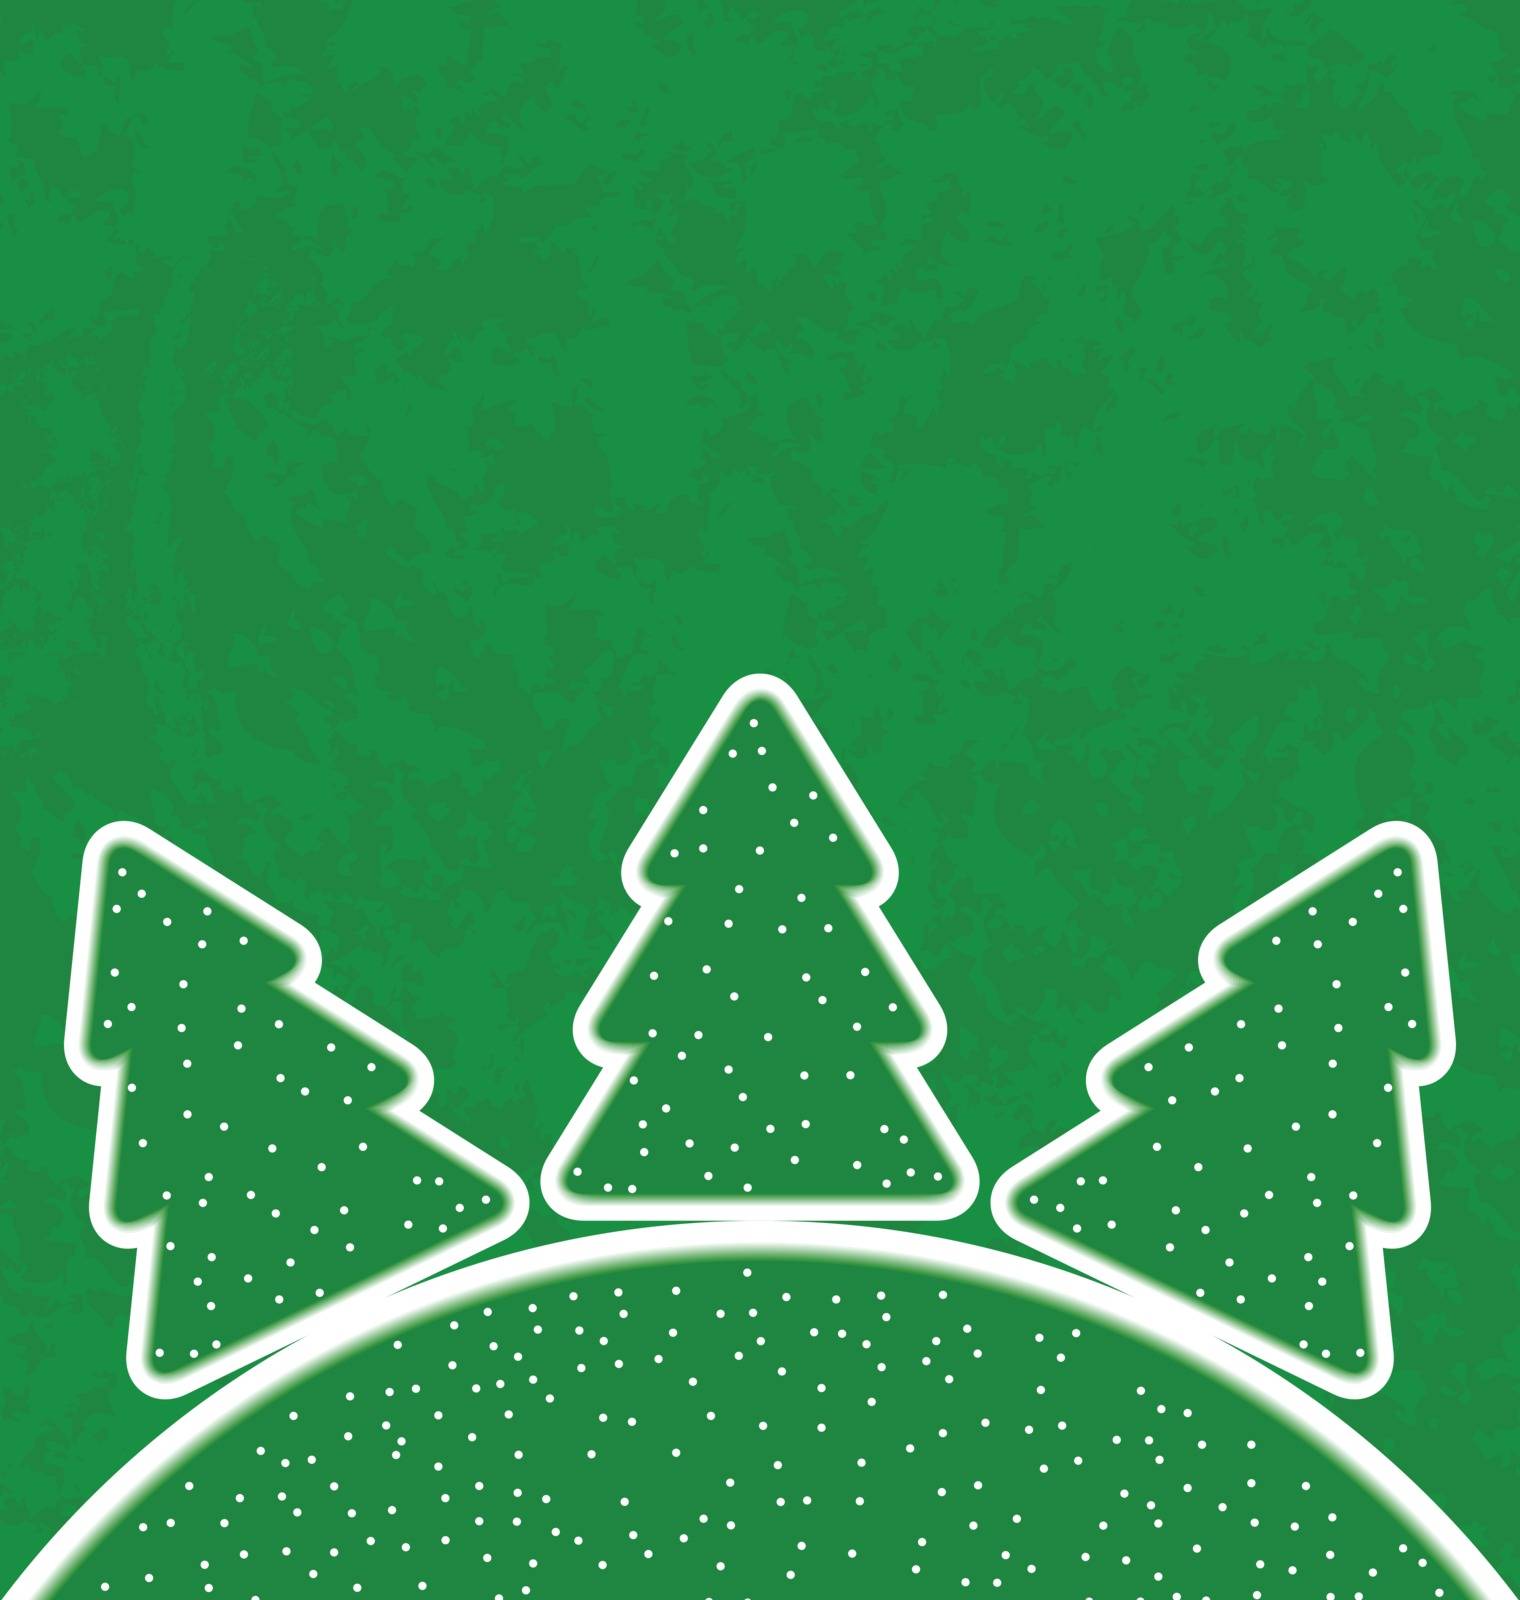 Illustration green paper cut-out set christmas tree - vector 